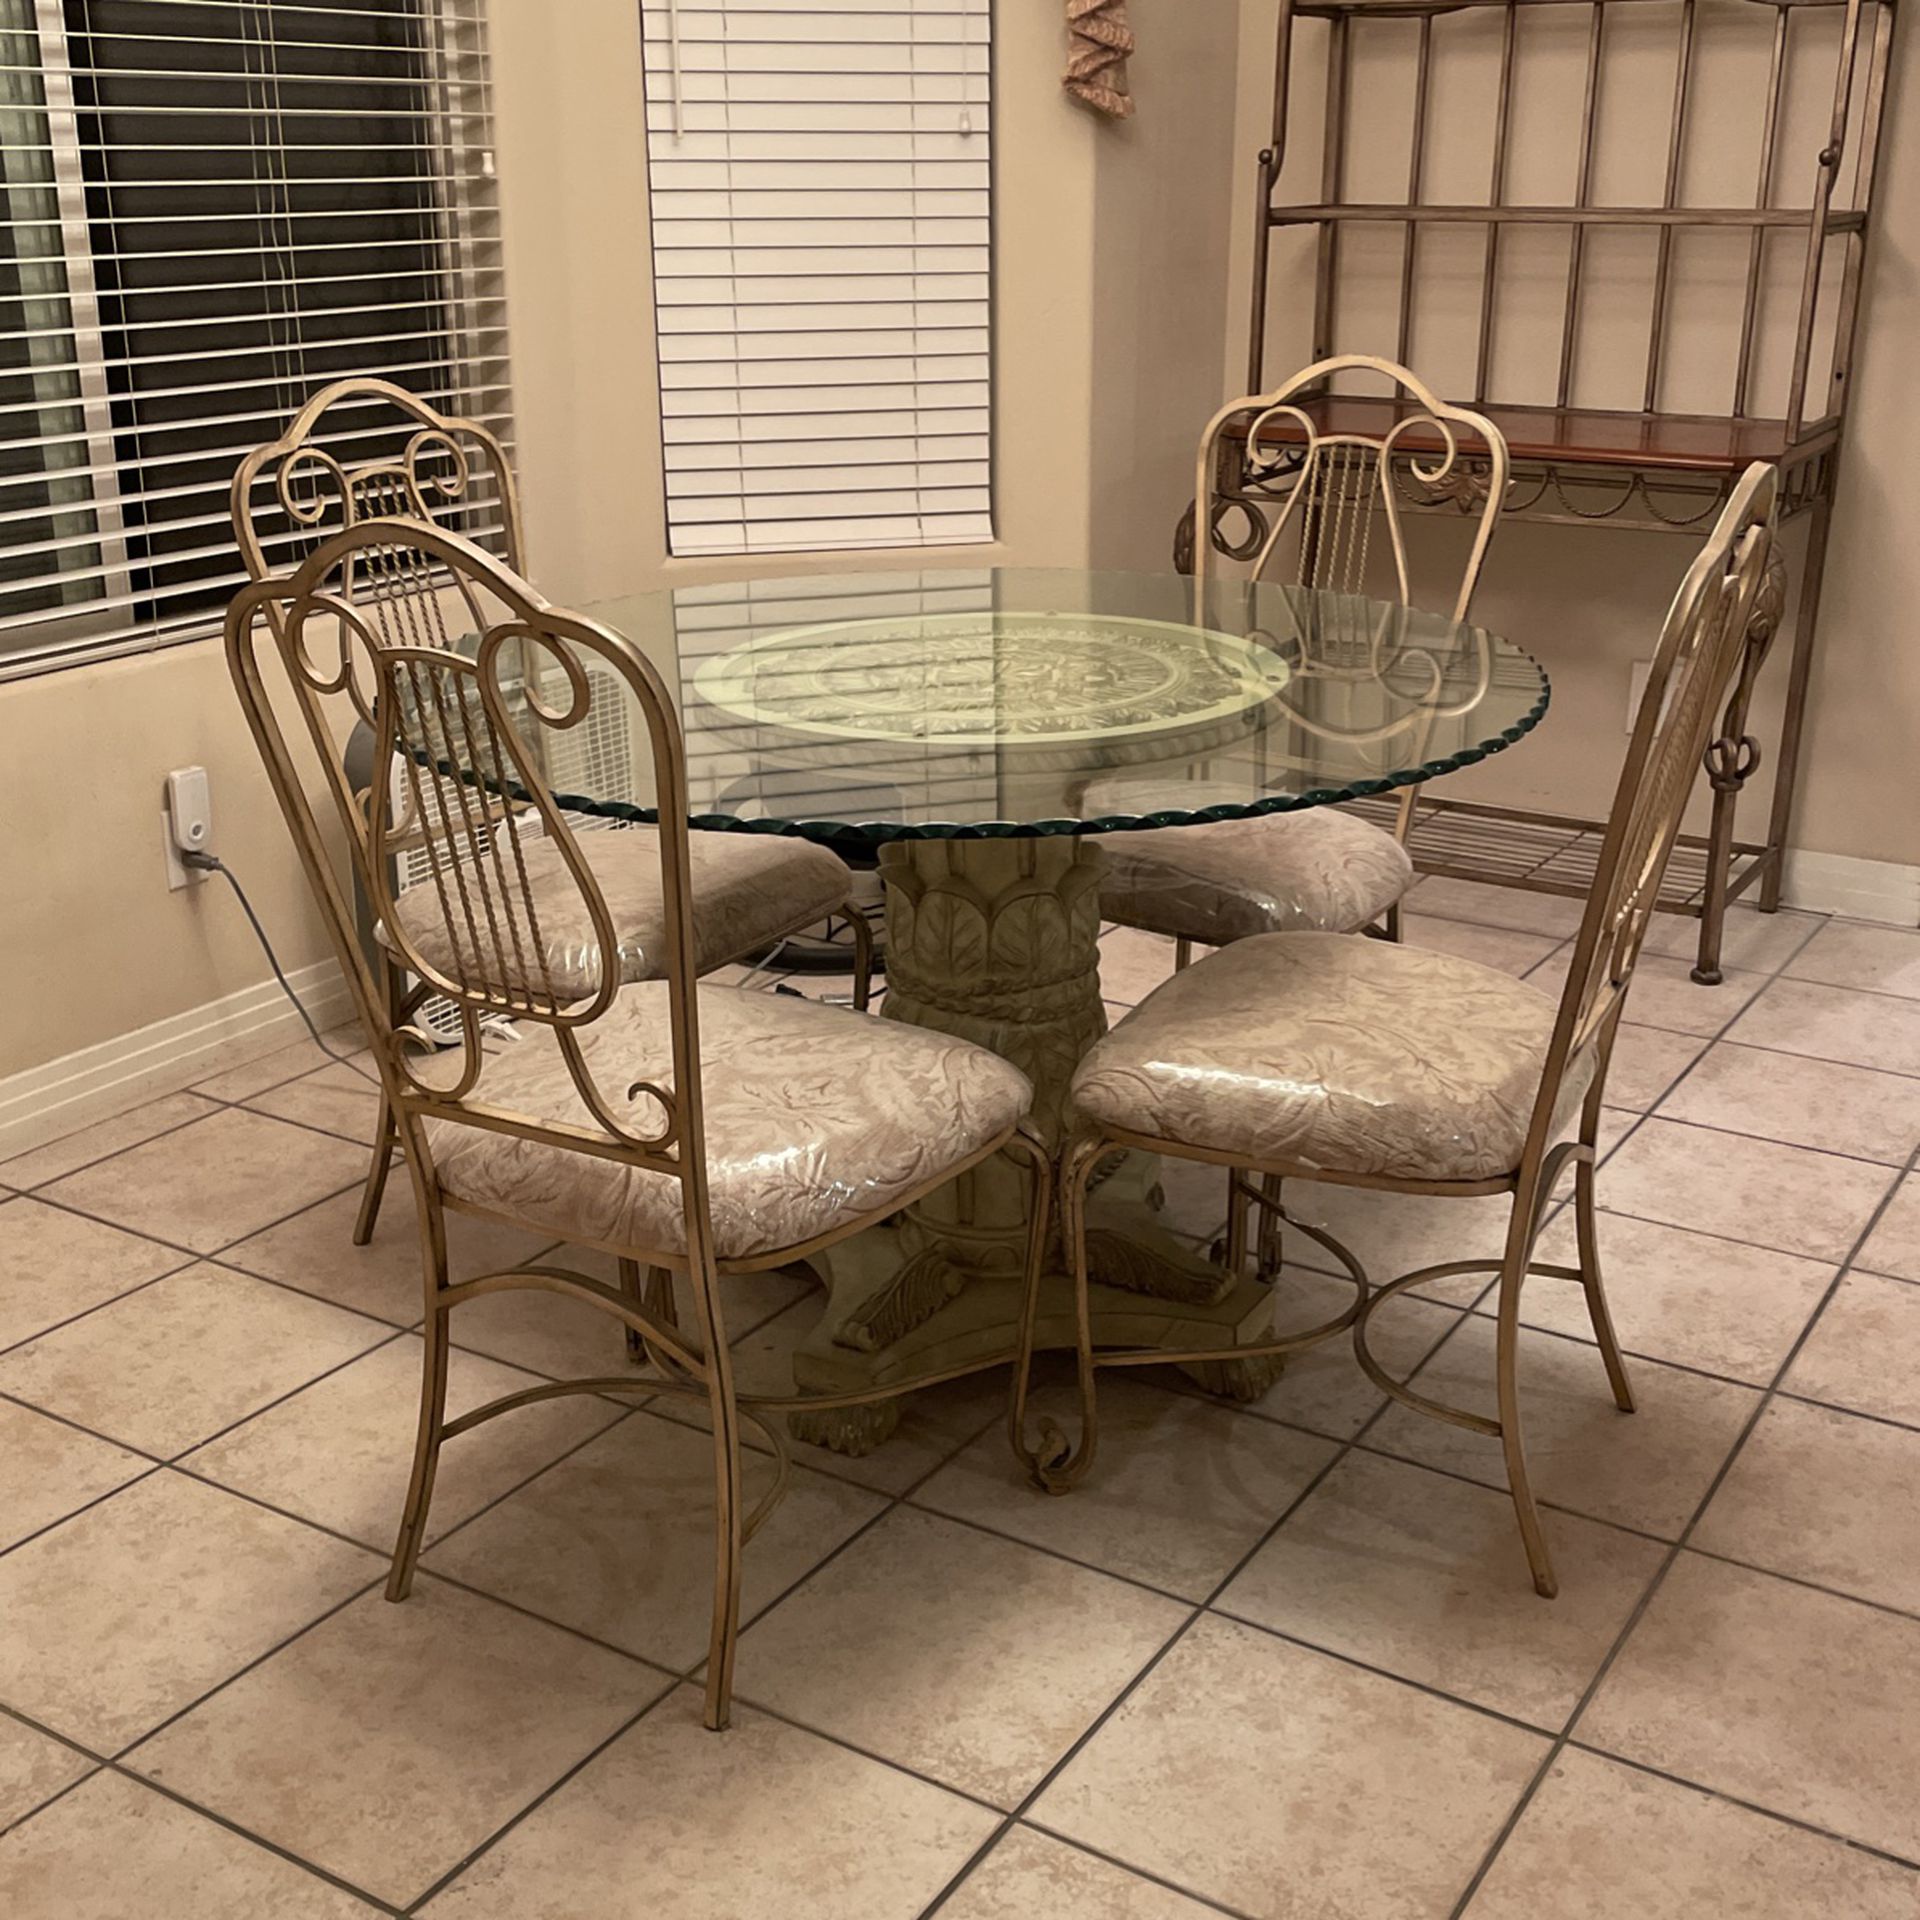 Breakfast nook table, and four chairs